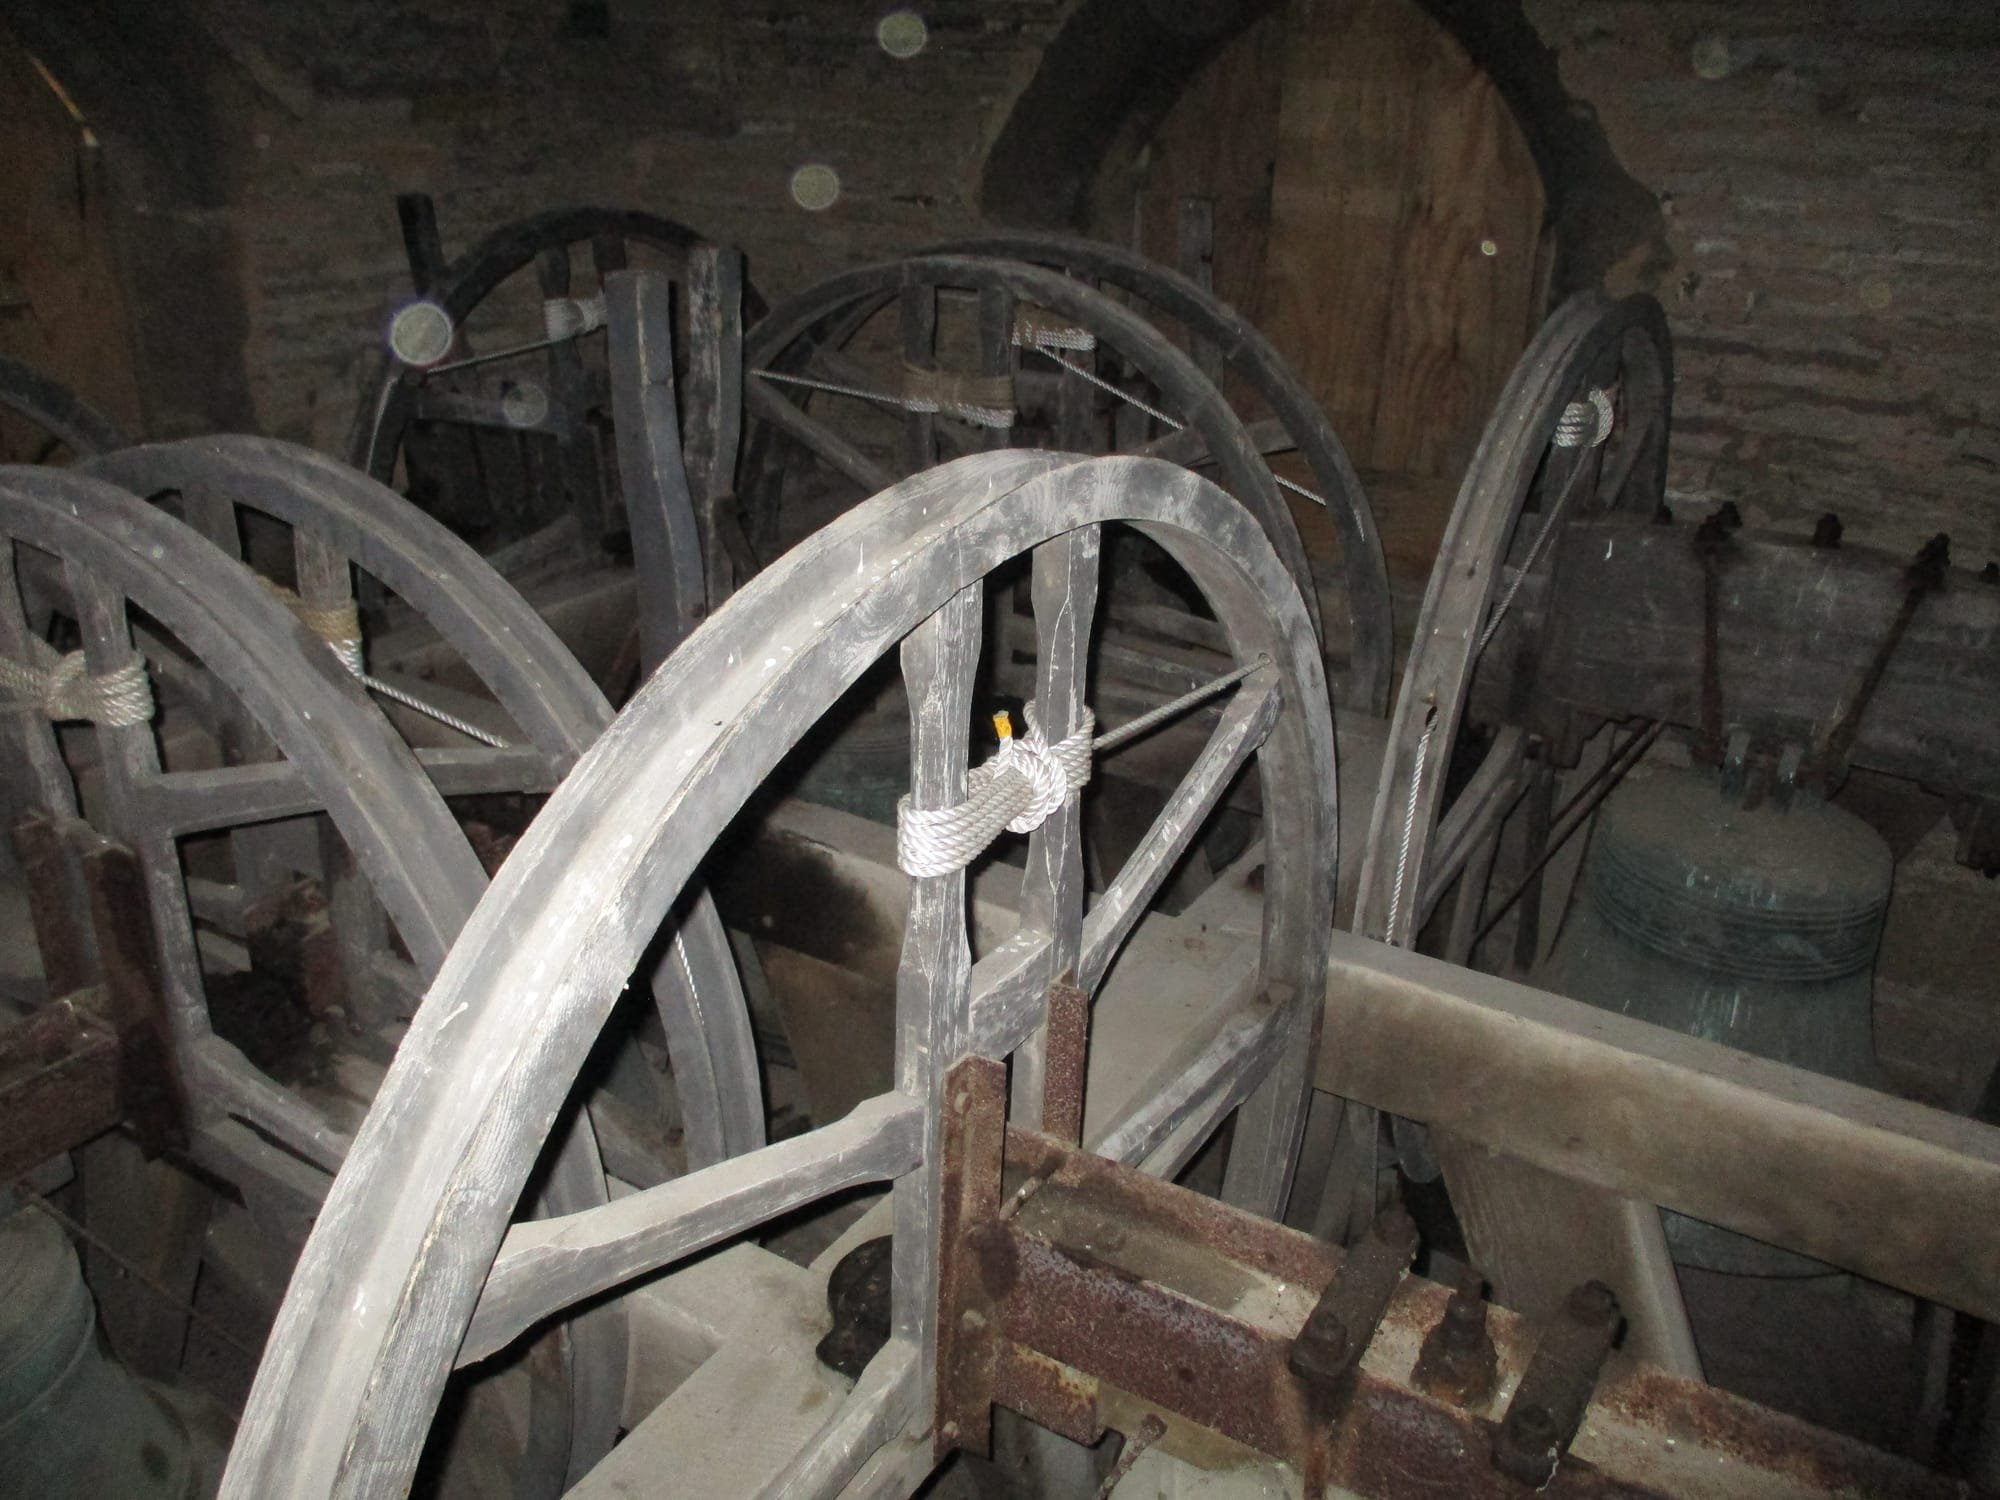 The church bells of St Mary's